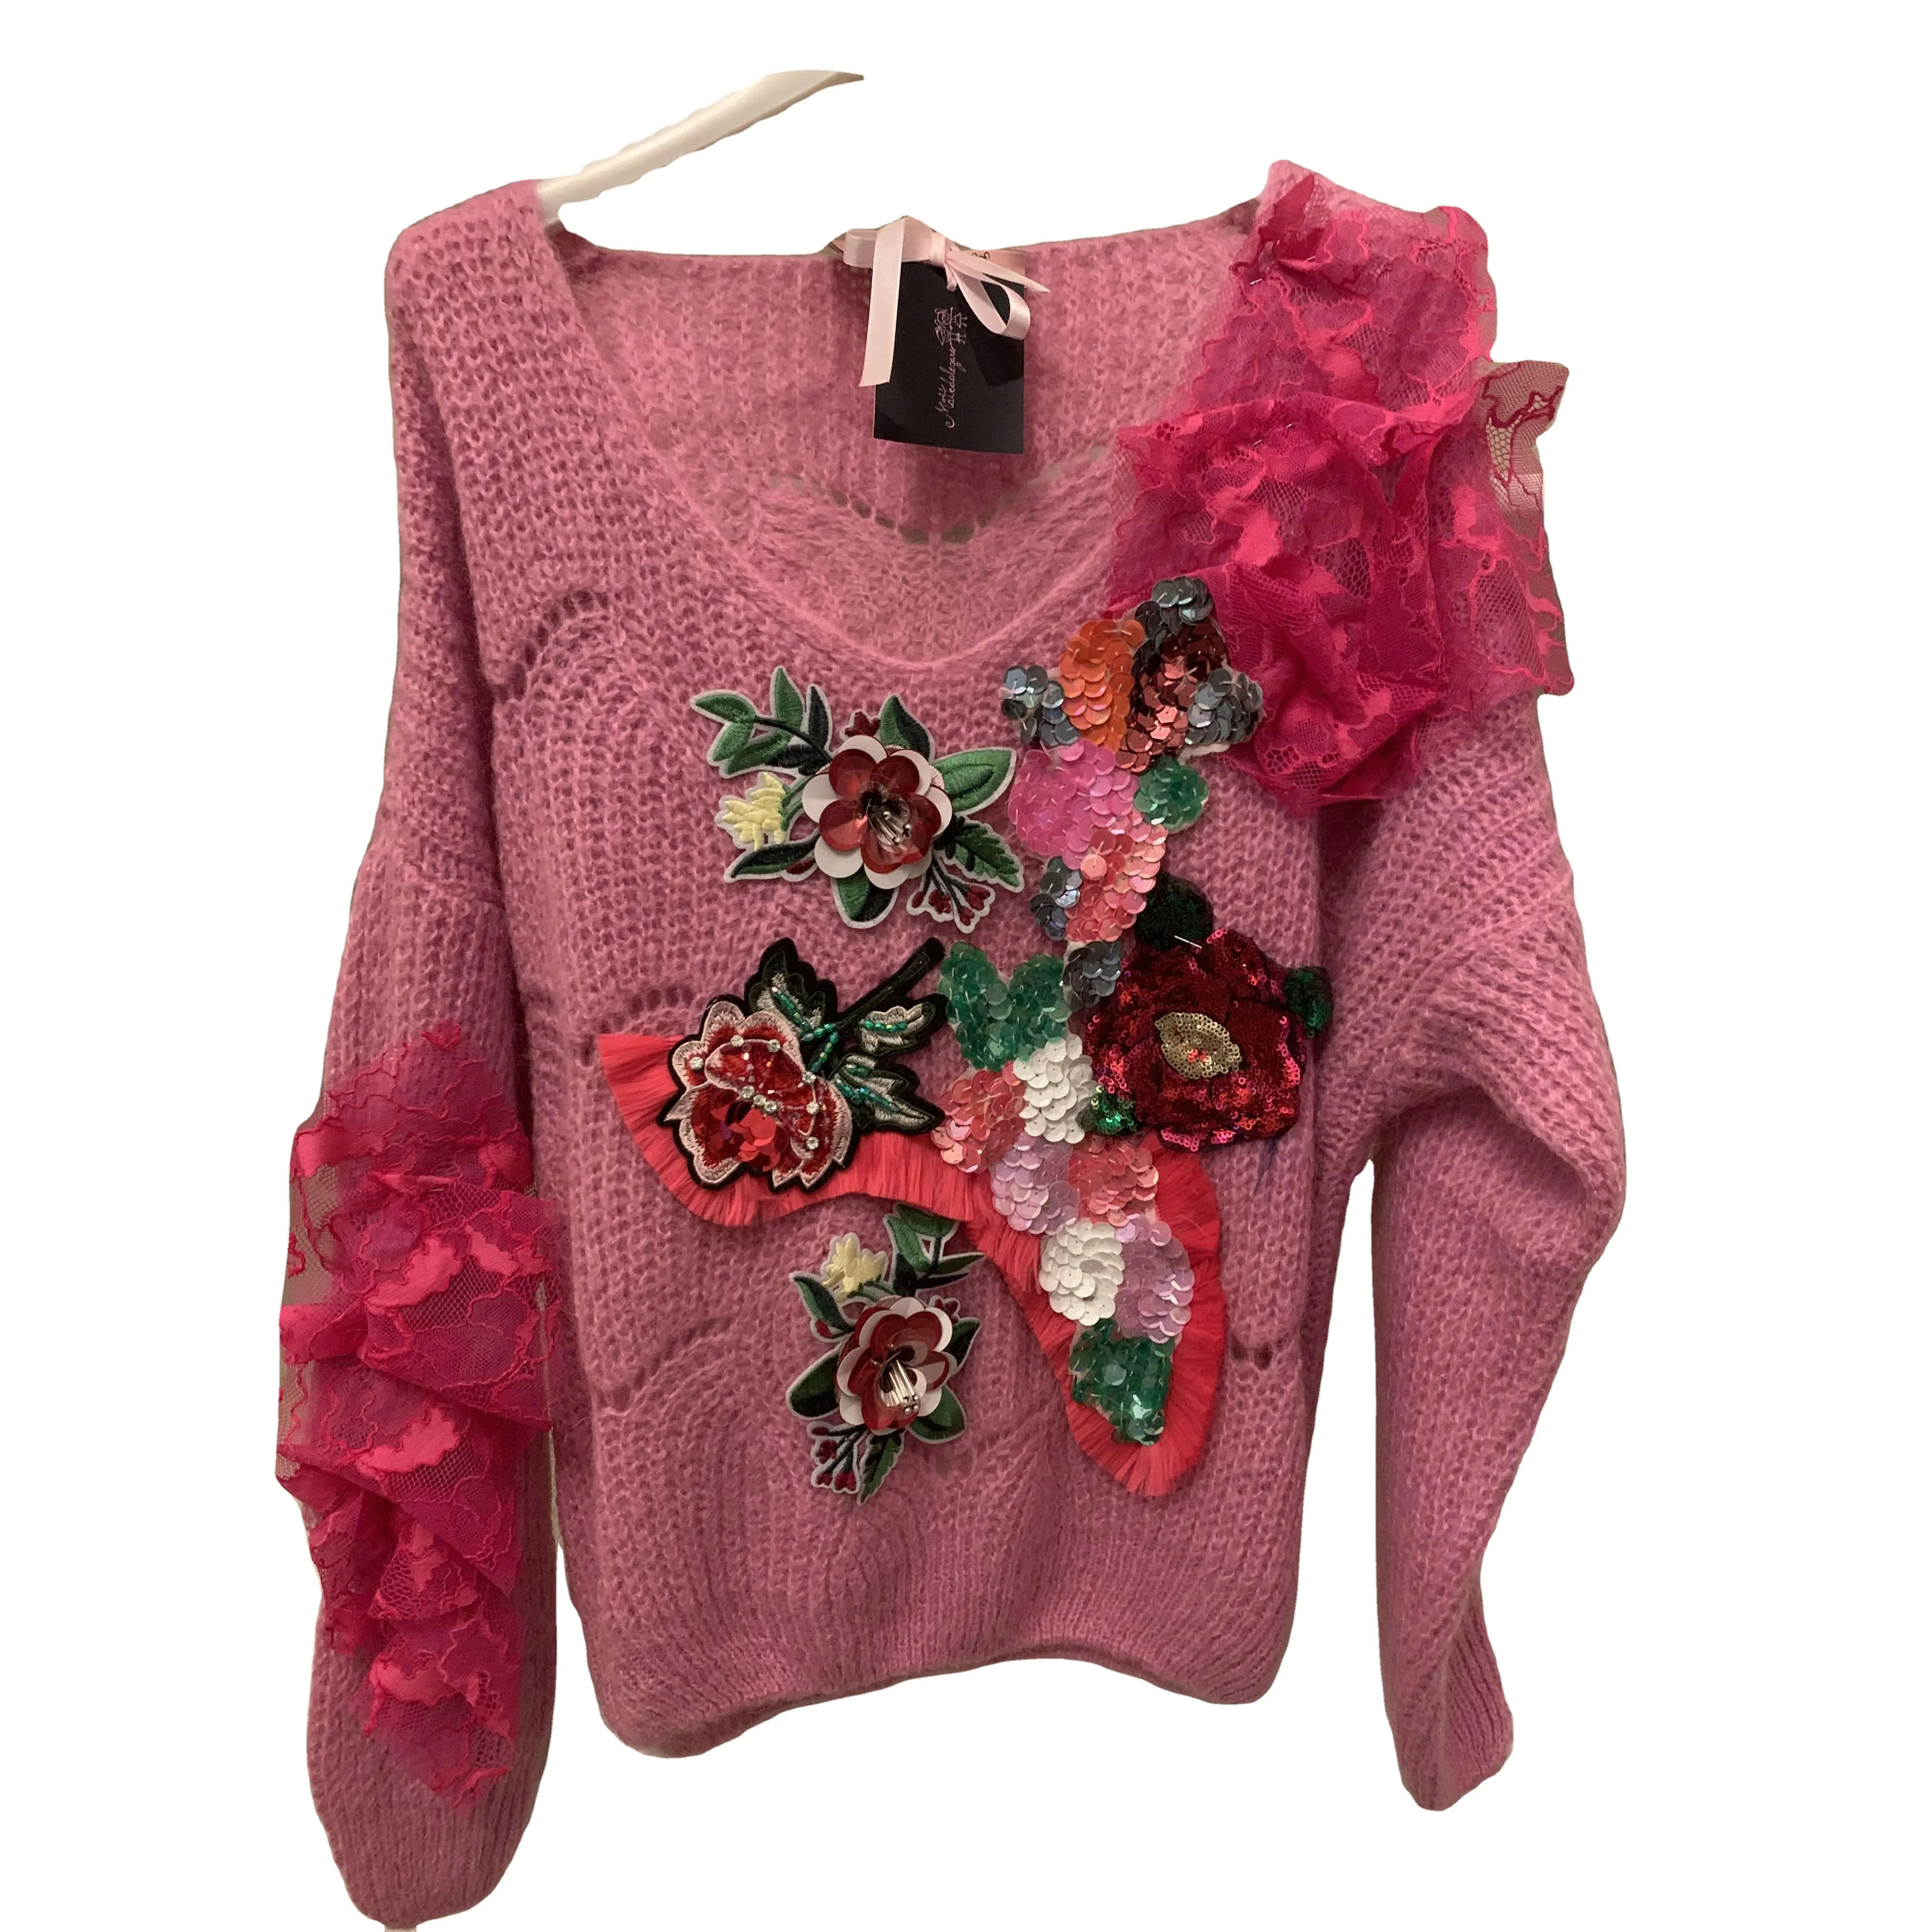 womwn's sweaters Made in Italy V-neck with embroidery details sequins floral motifs lace inserts and fringes